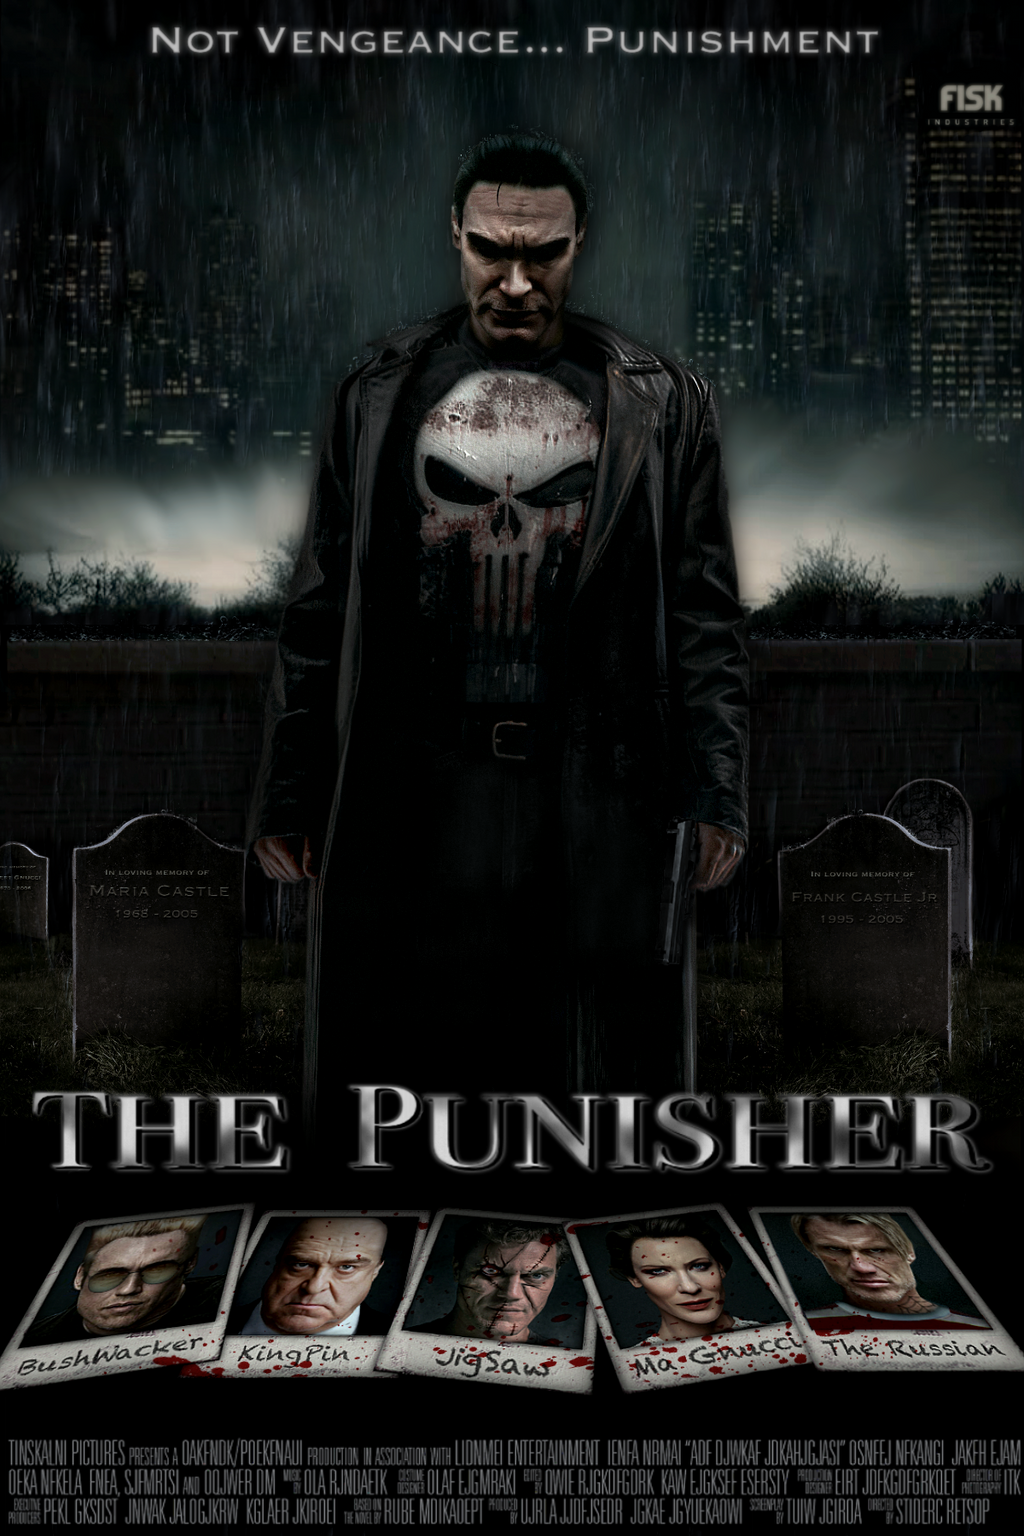 Wallpaper - The Punisher 3 by the-system on DeviantArt